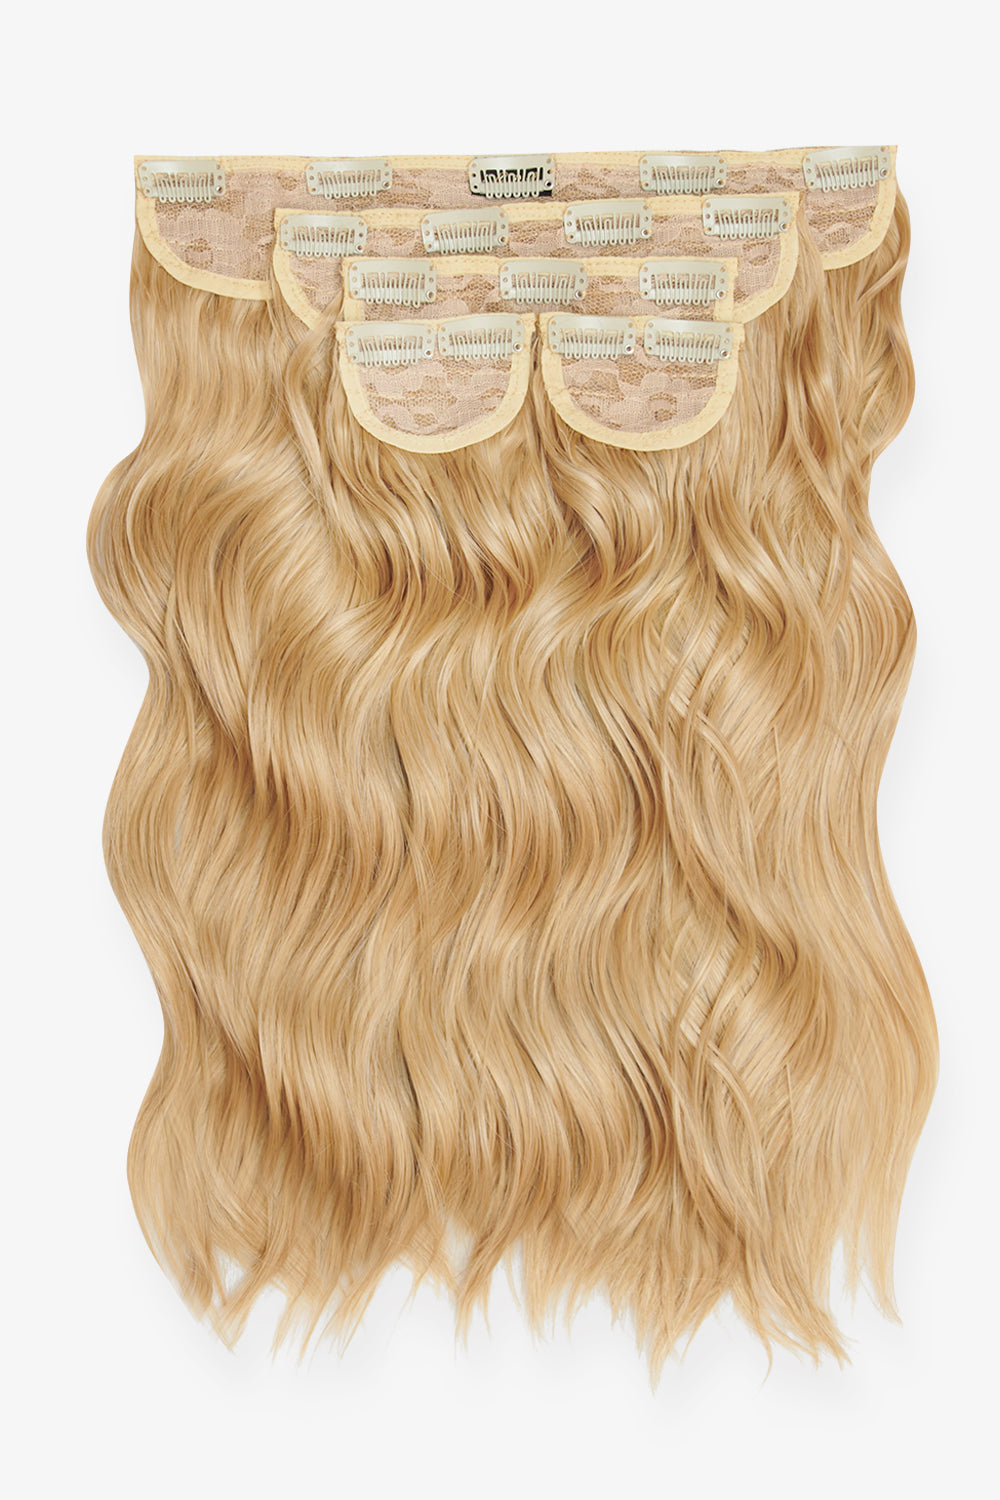 Super Thick 16’’ 5 Piece Brushed Out Wave Clip In Hair Extensions - Golden Blonde